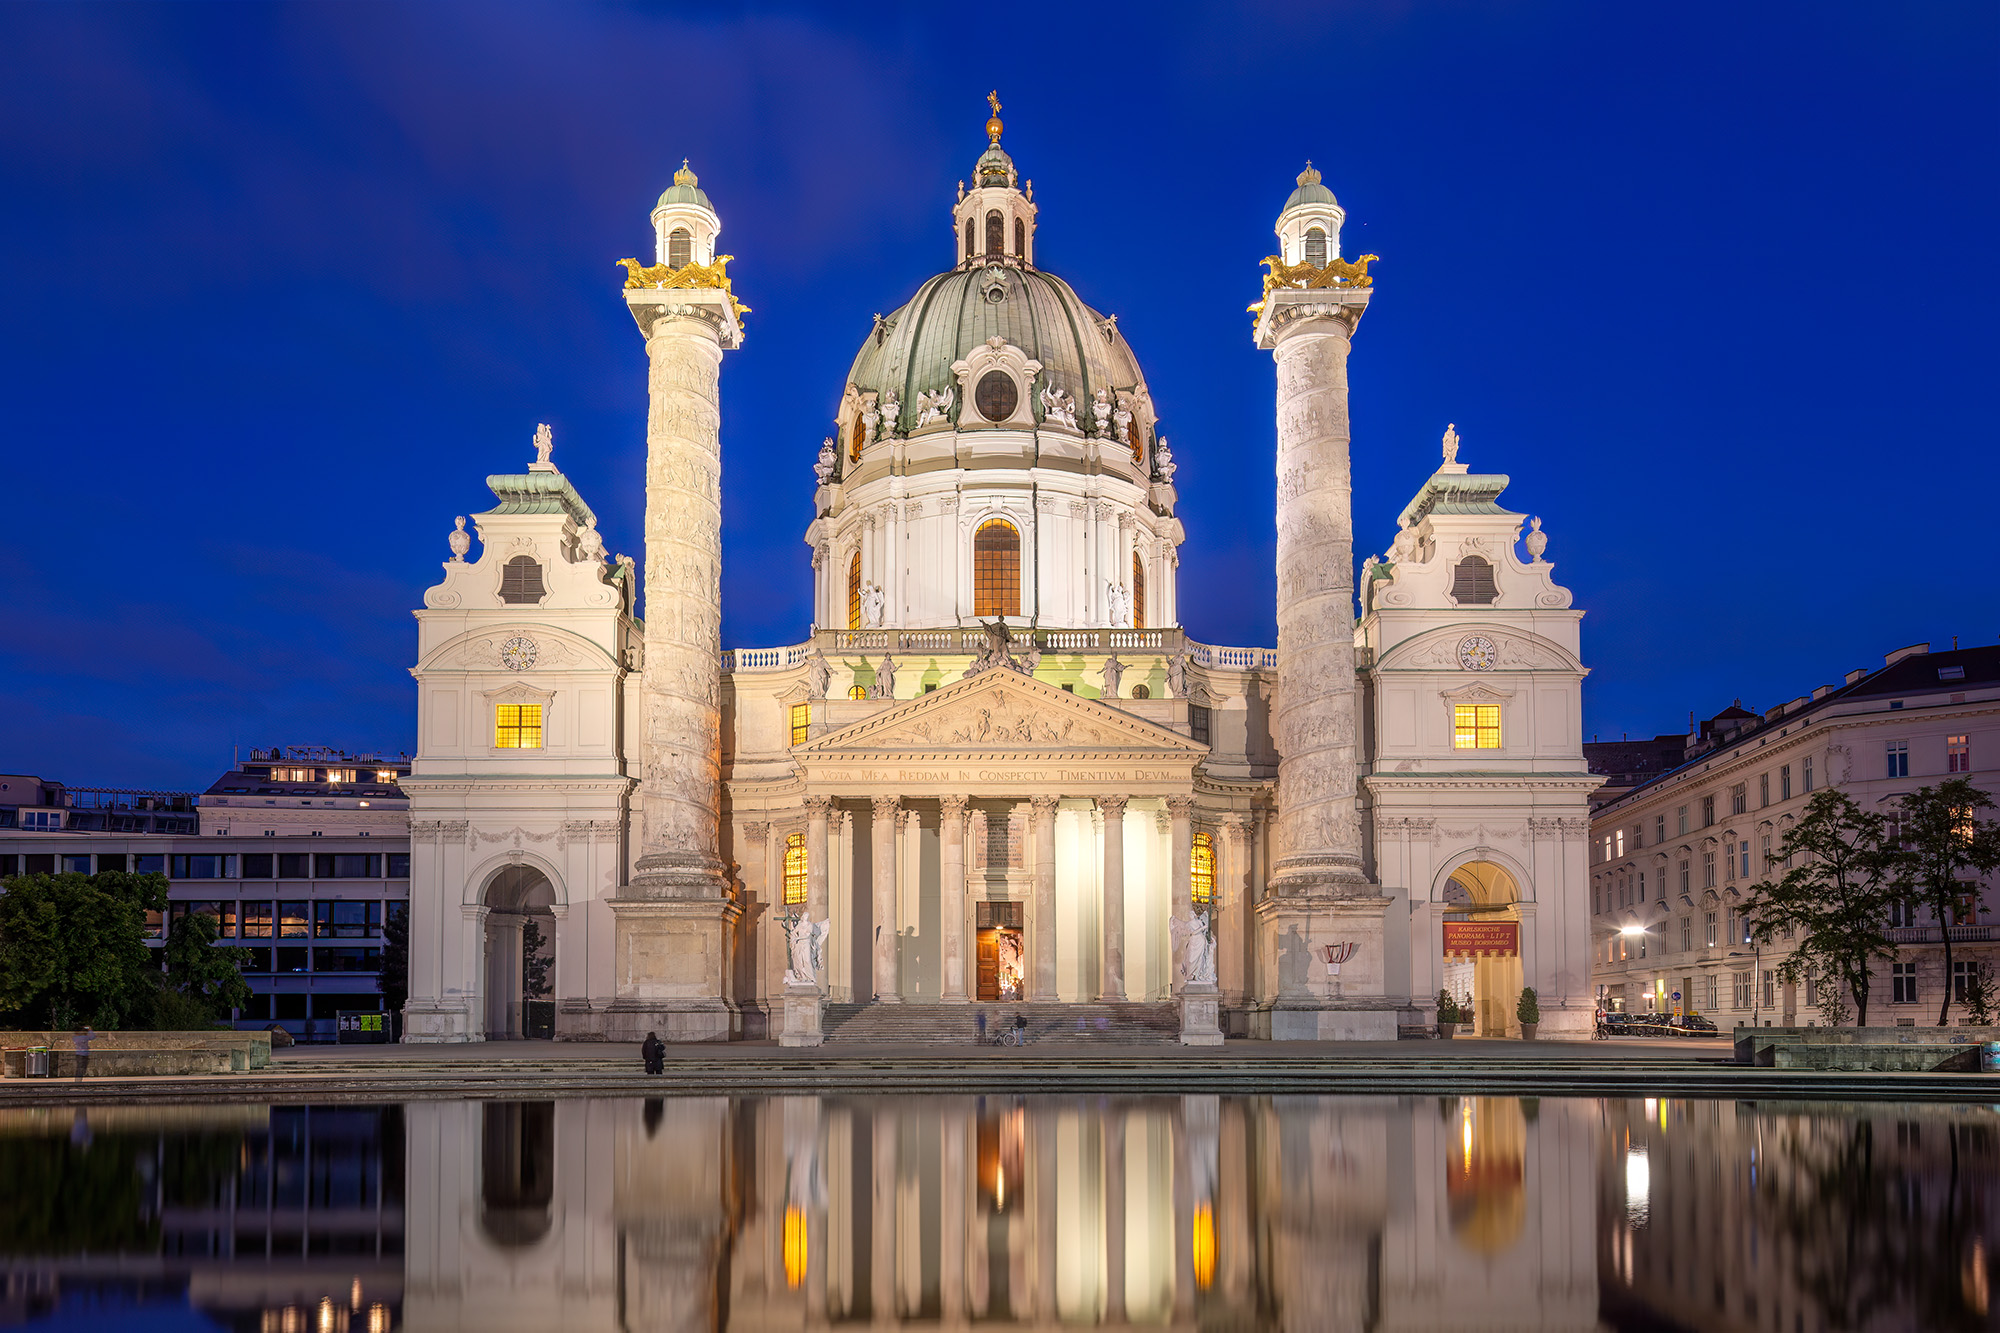 As the day gracefully transitions into the tranquil blue hour, Vienna's Karlskirche emerges as a sublime work of art. This image...